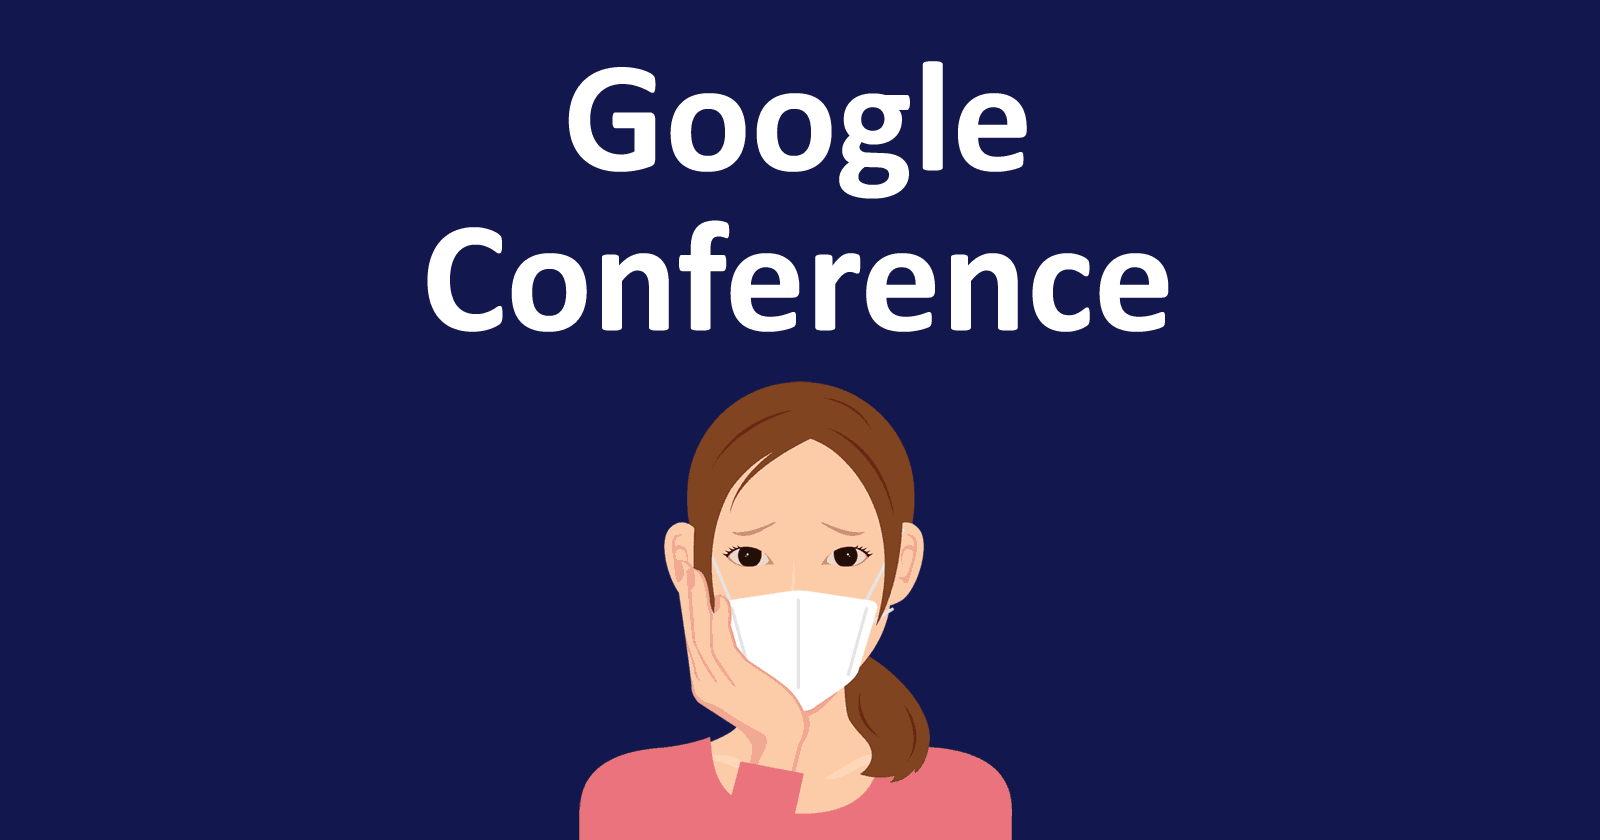 Image of a woman wearing a medical face mask associated with coronavirus - Covid-19 and the words Google Conference